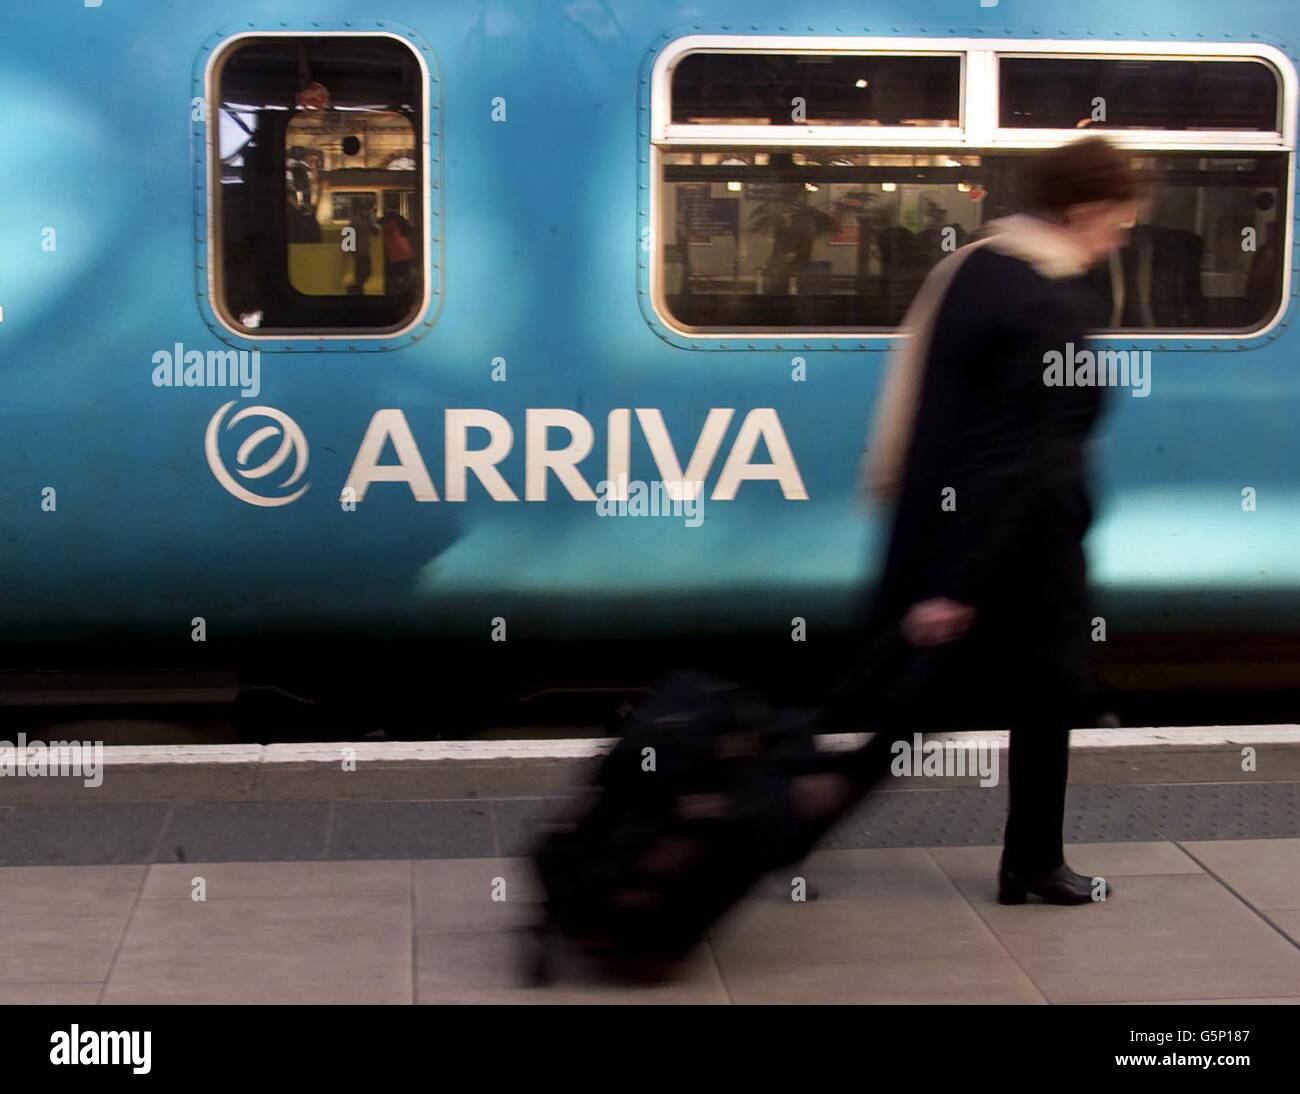 Please be aware that this picture shows a train operated by Arriva Trains Northern, and that from 1 Feb 2004 this franchise is run by Northern Rail. Accordingly, this picture should not be used to illustrate any story relating to Arriva franchises. A passenger walks passed an Arriva train on a platform at Manchester's Piccadilly station. The advertising watchdog told a train company not to repeat 'misleading claims that it was offering passengers an 'efficient service'. * ... In a recruitment advert, Arriva Trains Northern said it 'provided efficient passenger rail services across the North Stock Photo